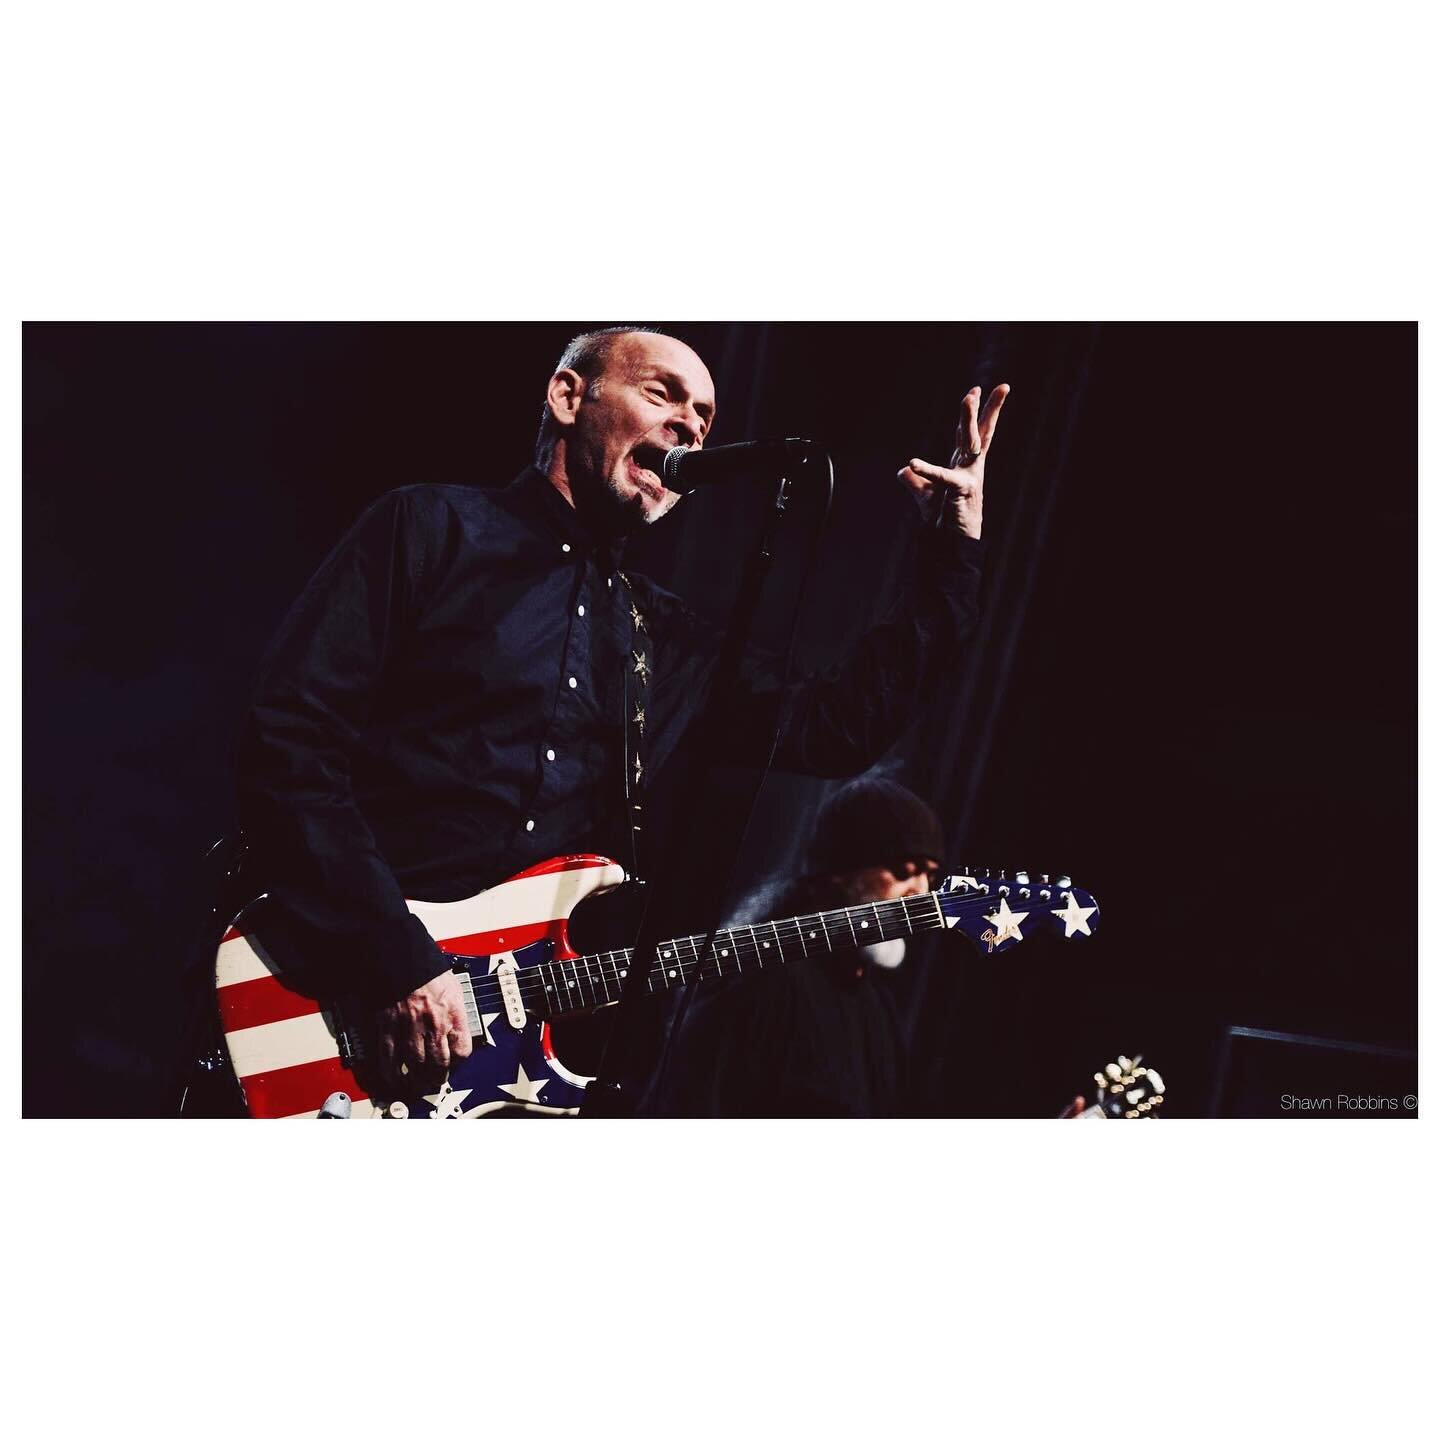 WAYNE KRAMER &bull; shot at @theregencyballroom in 2018 &bull; It was one of those &ldquo;pinch me&rdquo; shows that I knew was significant even in the moment. It&rsquo;s hard to overstate MC5&rsquo;s importance in the history of rock and roll. The b